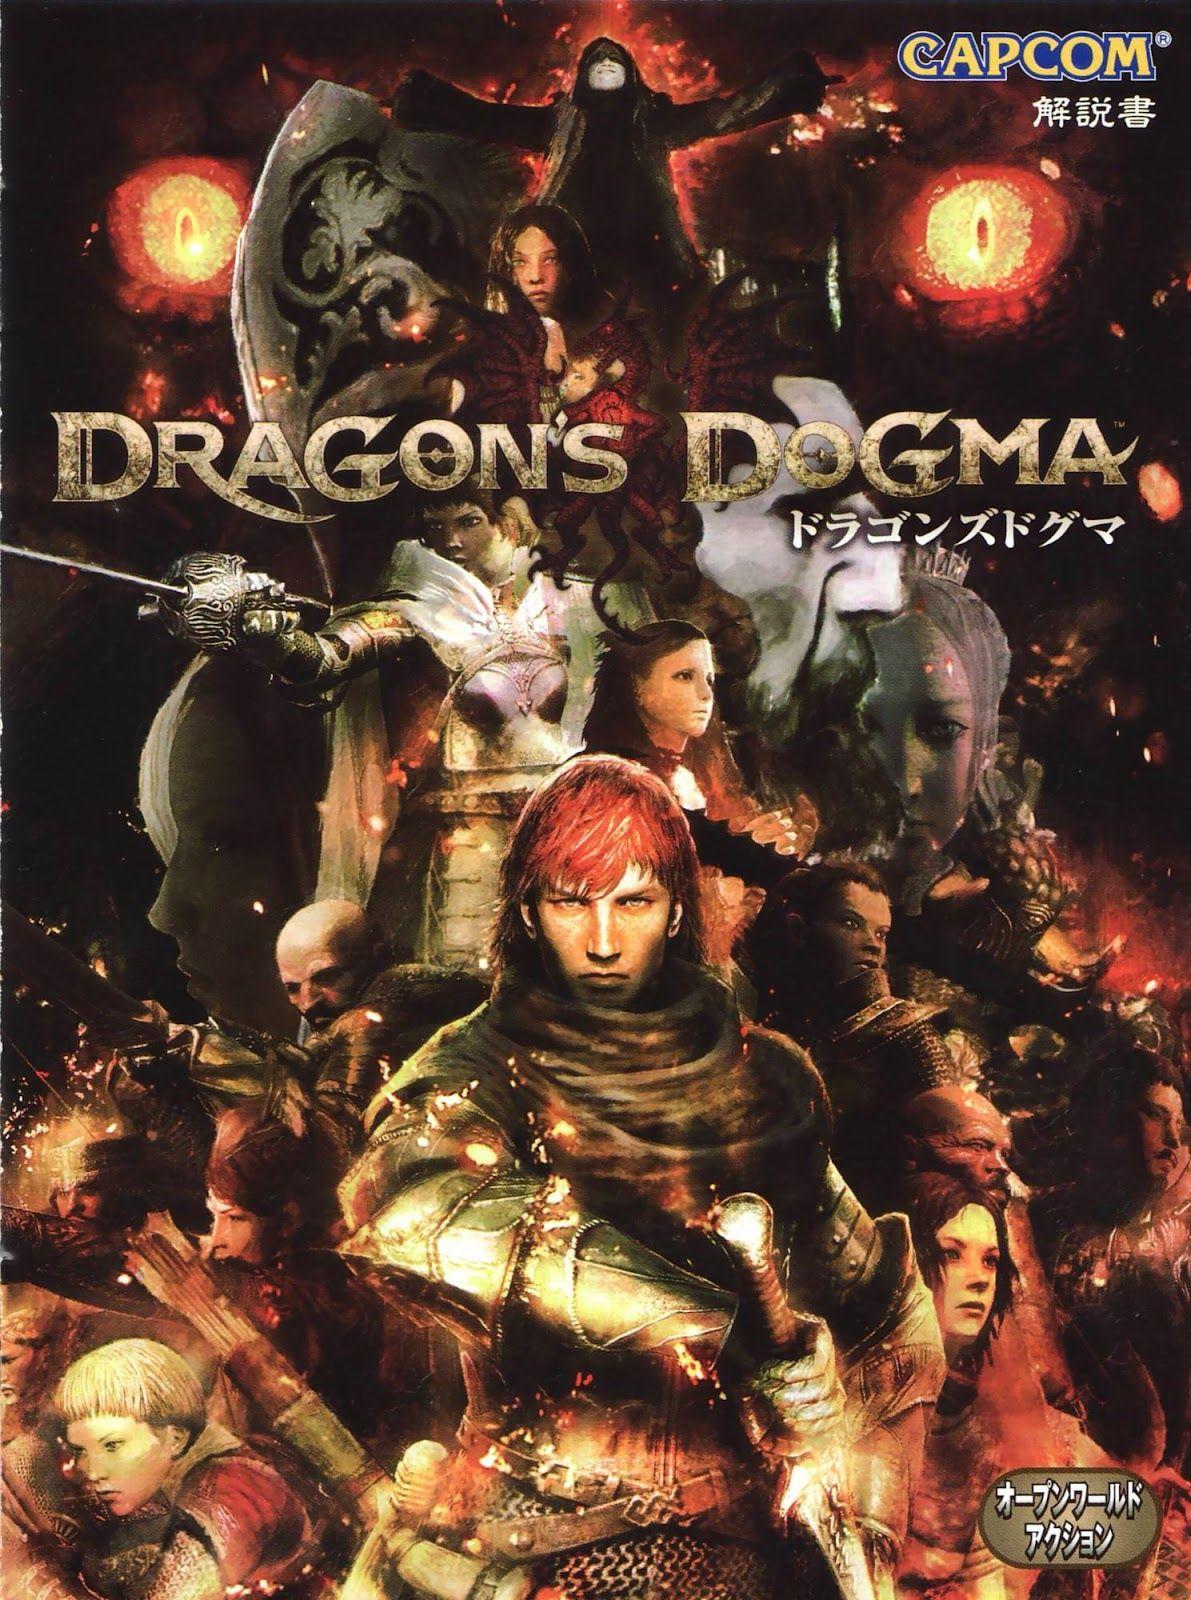 Rate Reviews: One Million Dragon's Dogma Sequel Confirmed Shipped